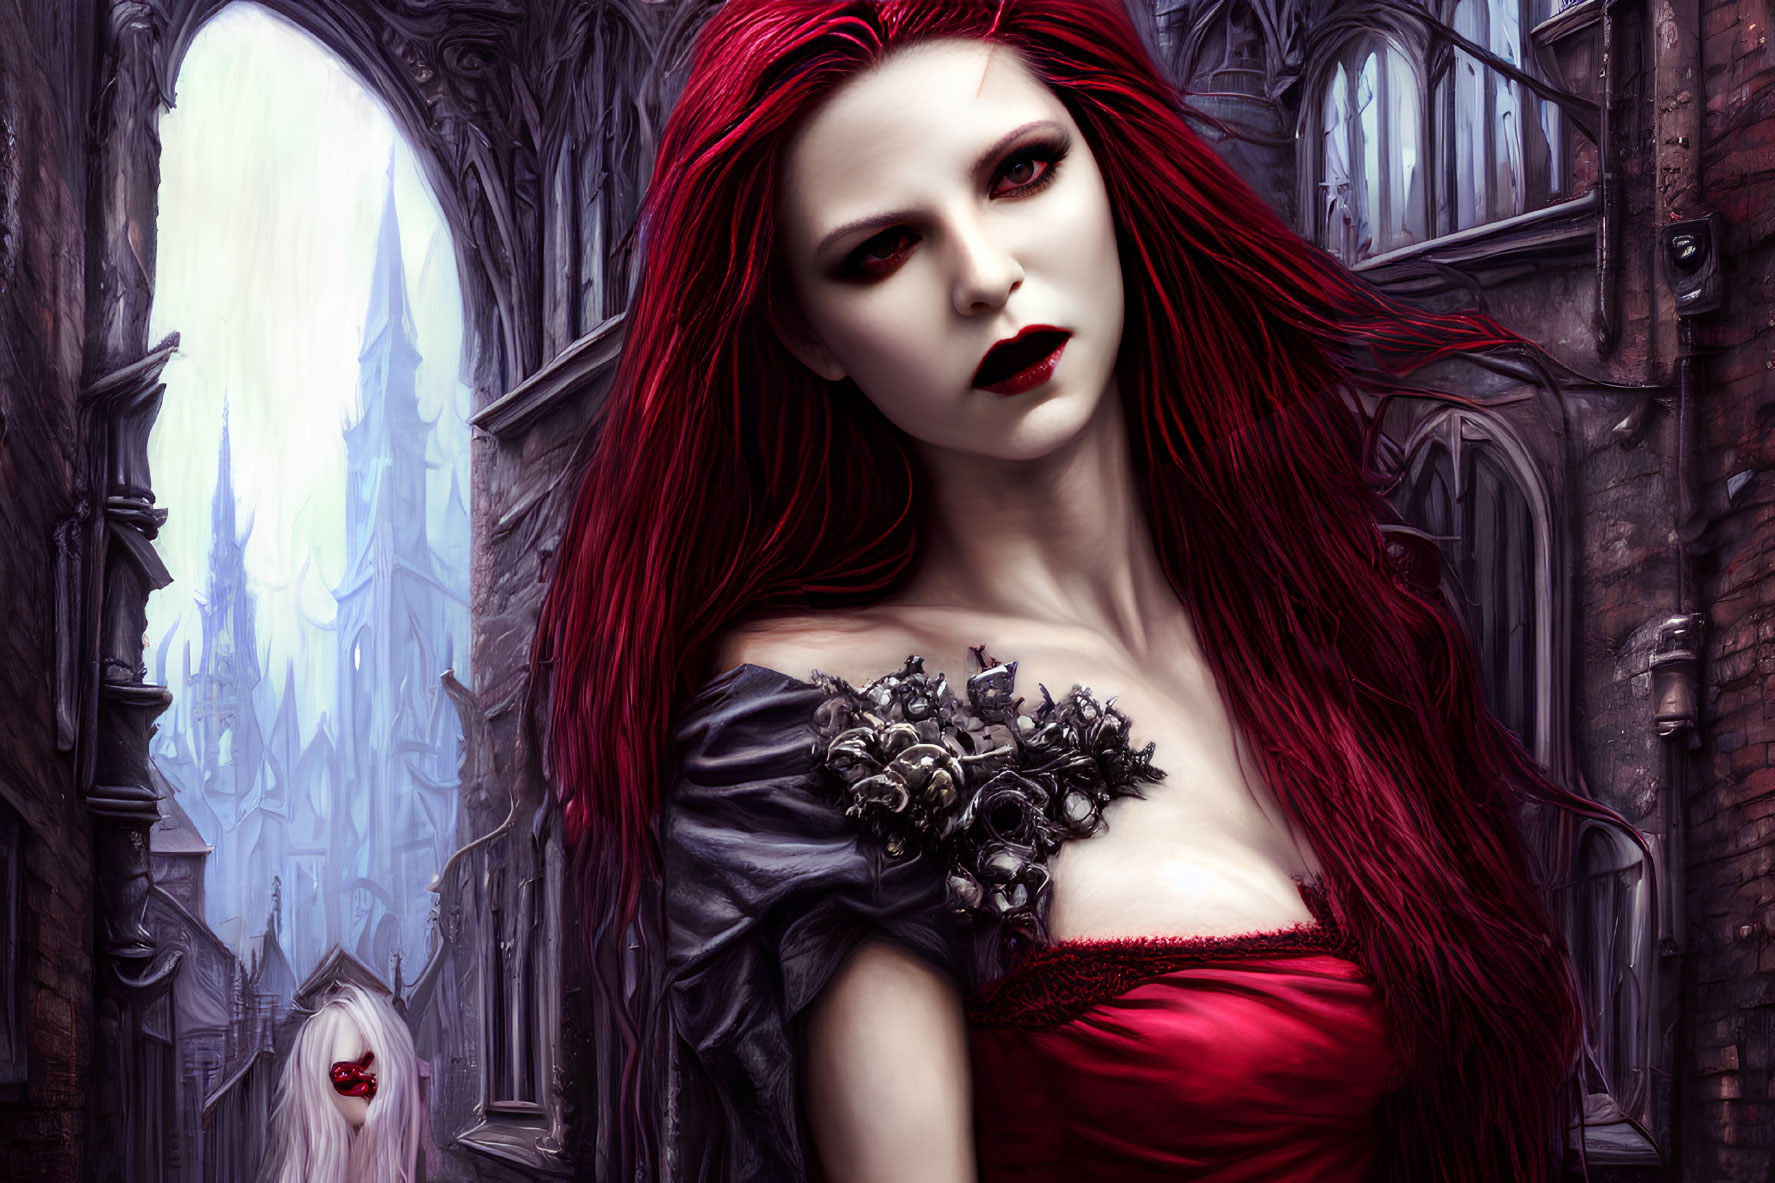 Red-haired female vampire in gothic ruin setting with striking makeup